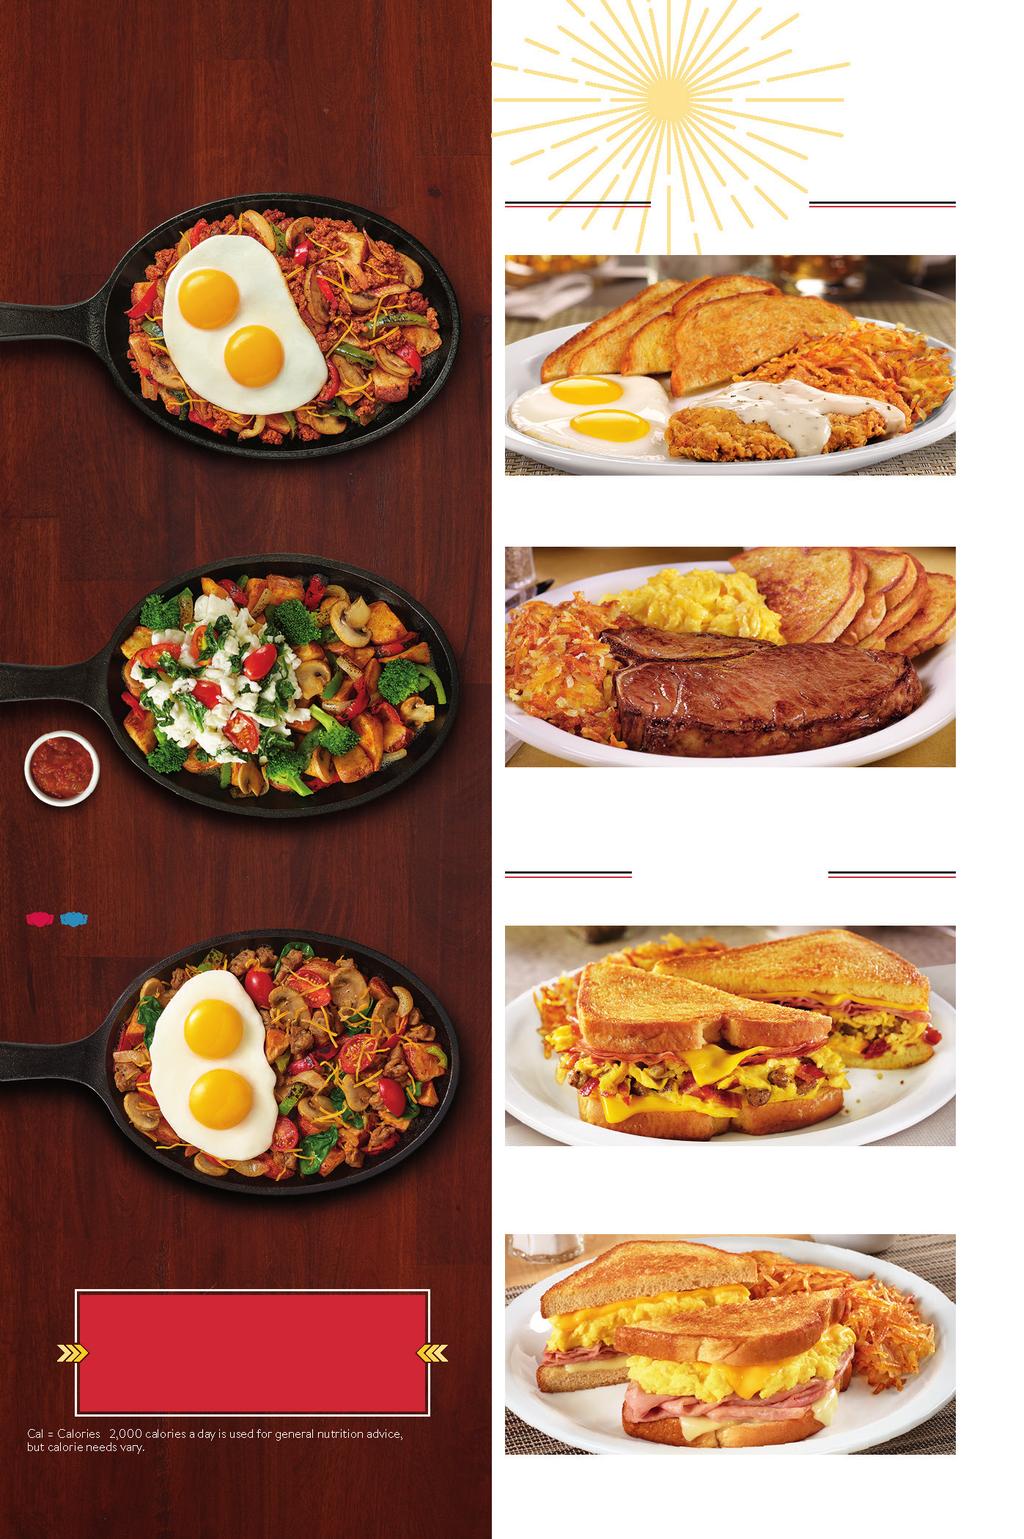 SIZ ZLIN Breakfast SKILLETS CAUTION: Skillets are hot. Handle with care. Classic BREAKFAST FAVORI T ES STEAK & EGGS SERVED WITH TWO EGGS,* HASH BROWNS AND CHOICE OF BREAD.